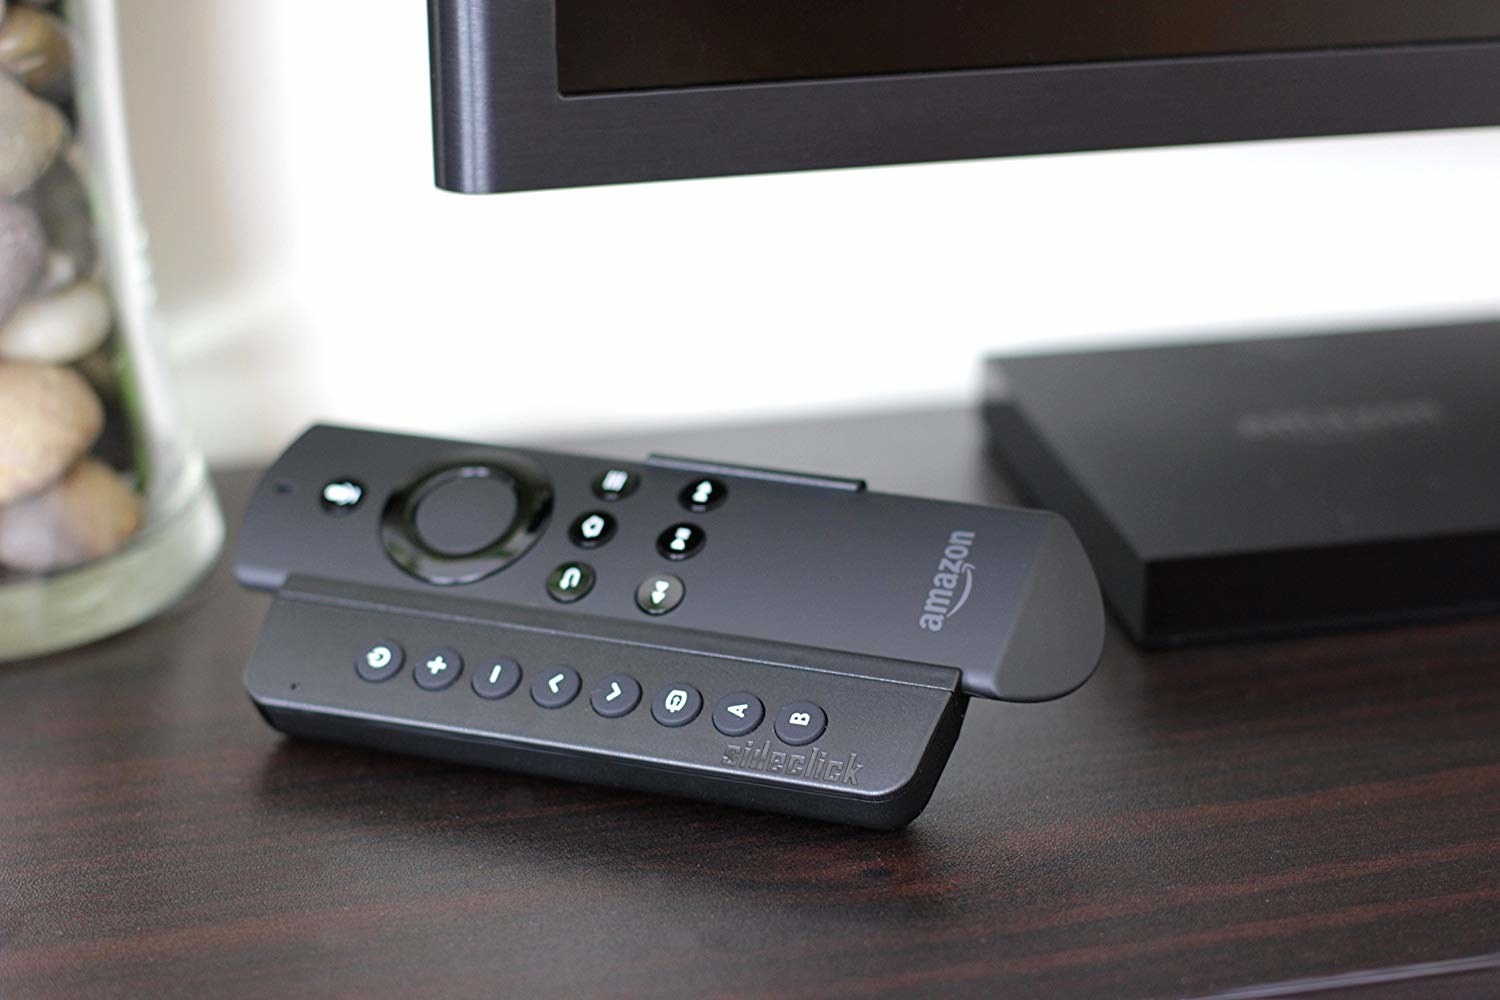 the amazon firestick remote sitting inside of the attachment which is kind of like a case with buttons